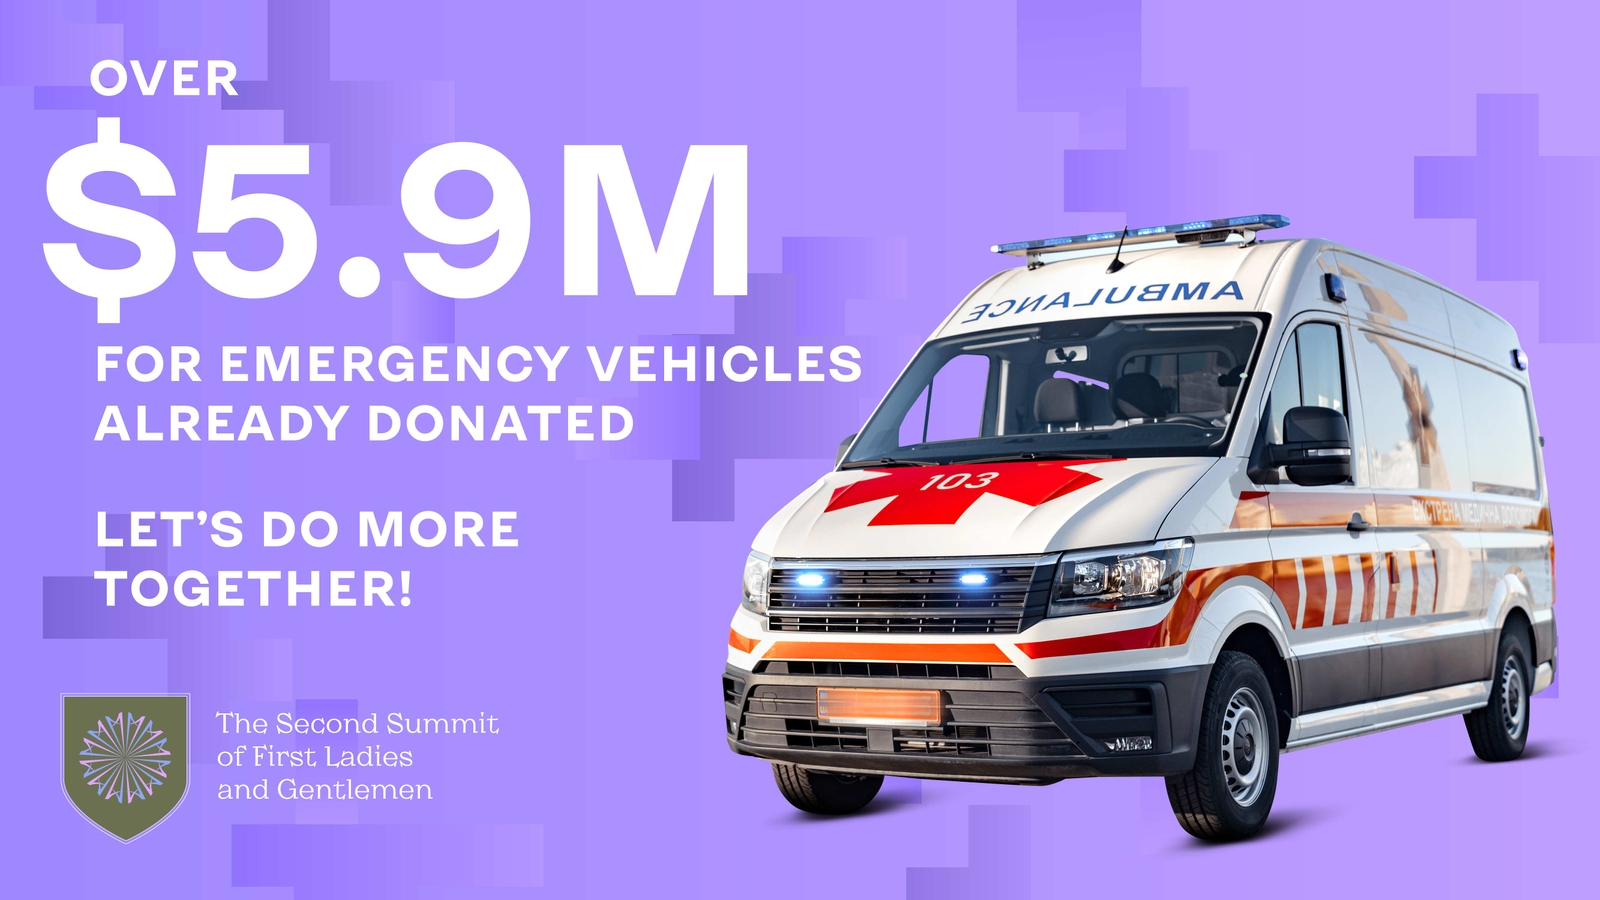 A Fundraiser for Ambulance Vehicles Was Launched as Part of the Second Summit of First Ladies and Gentlemen